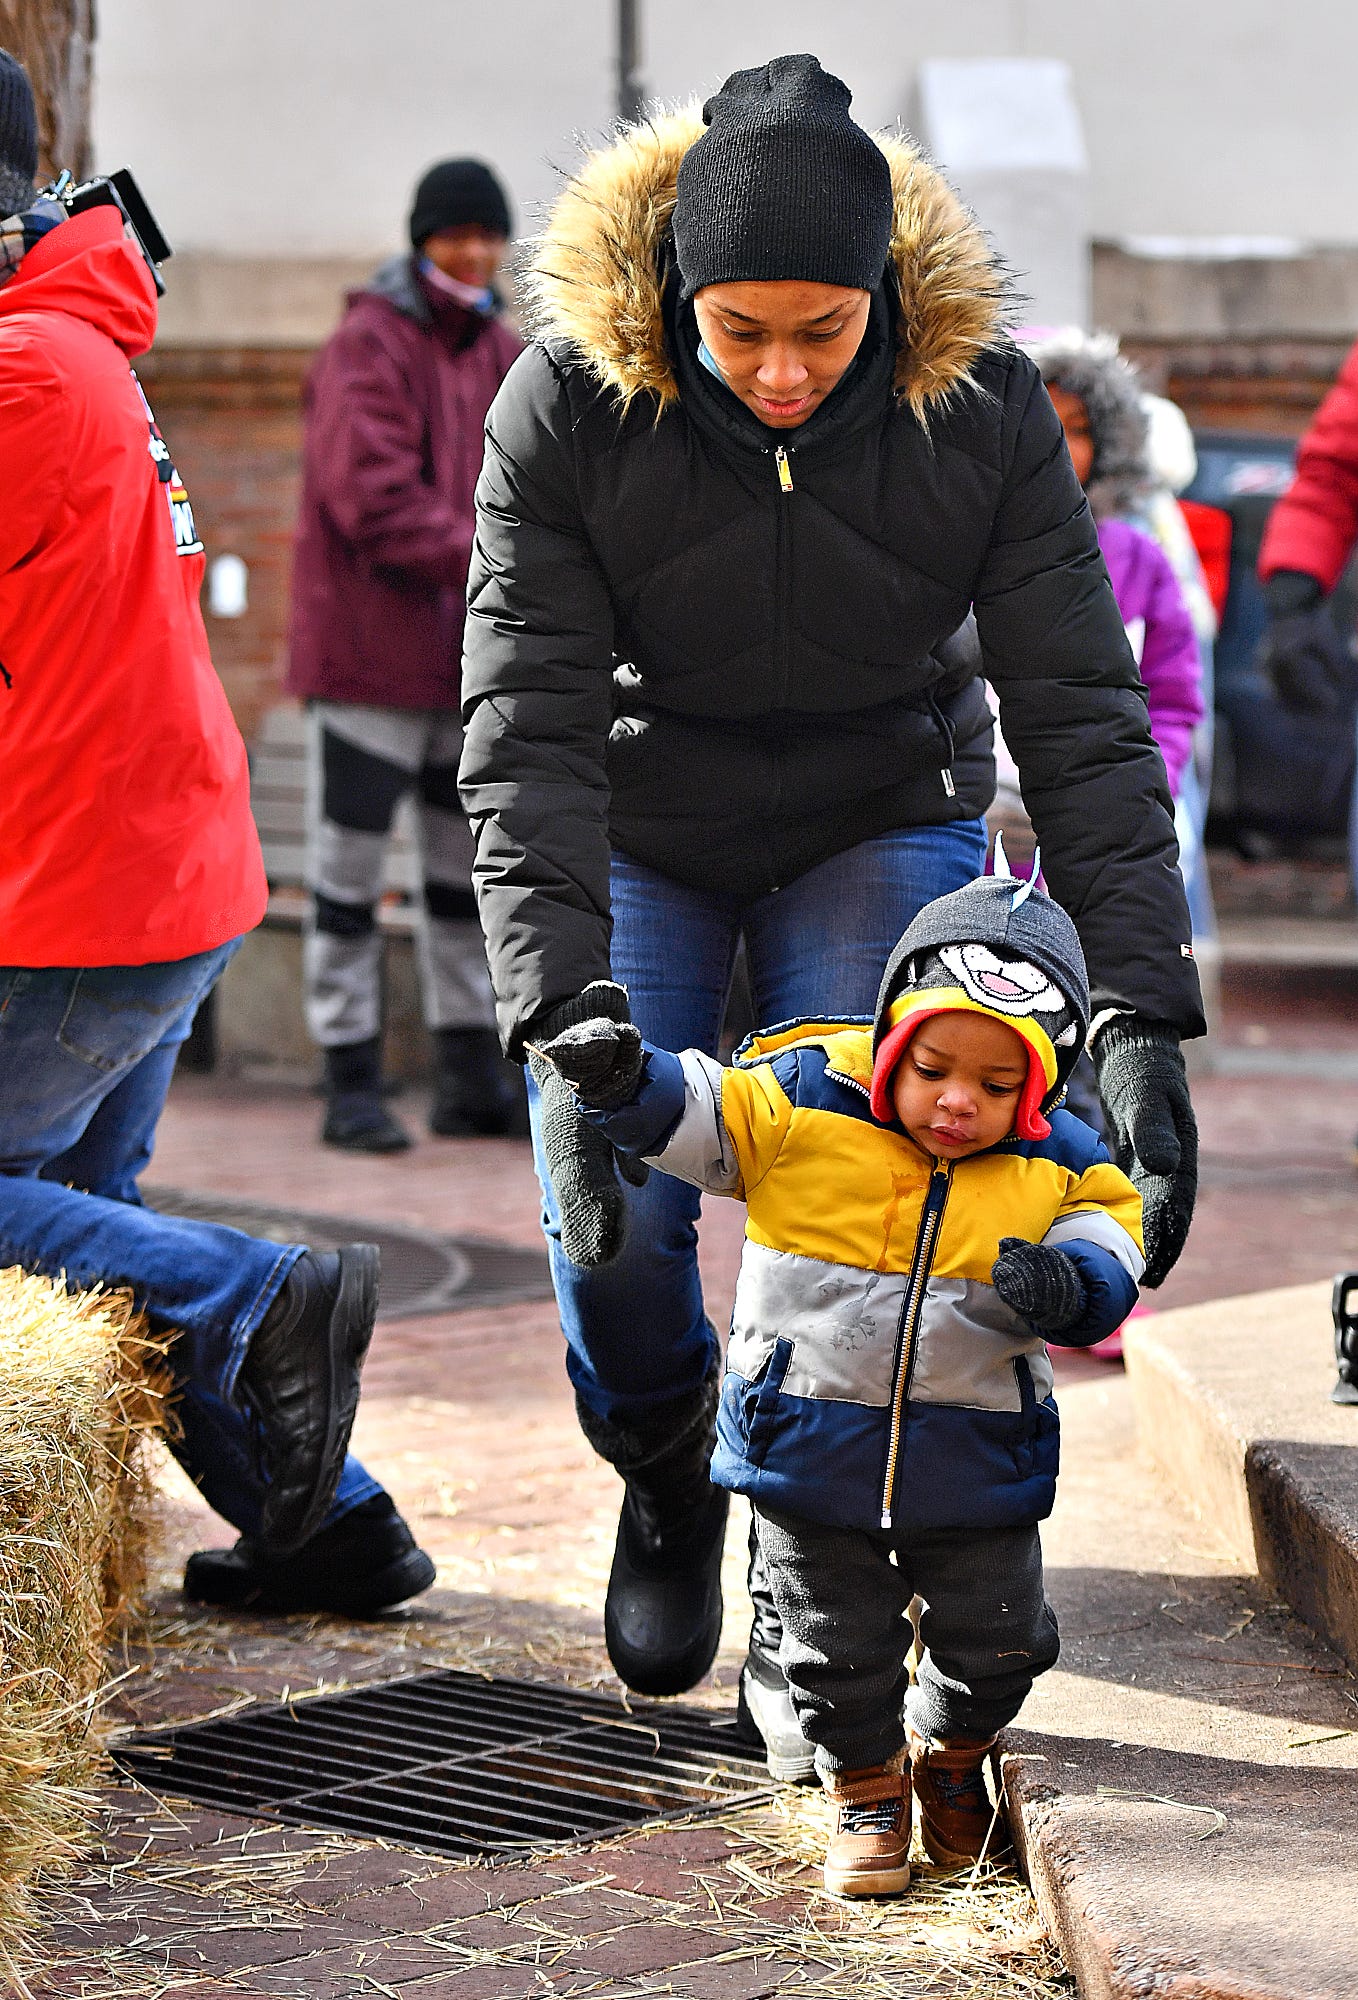 Jazzmine Magloire, of Spring Garden Township, follows her son Jonathan Magloire, 1, closely during the 8th annual FestivICE event in downtown York City, Saturday, Jan. 15, 2022. Dawn J. Sagert photo